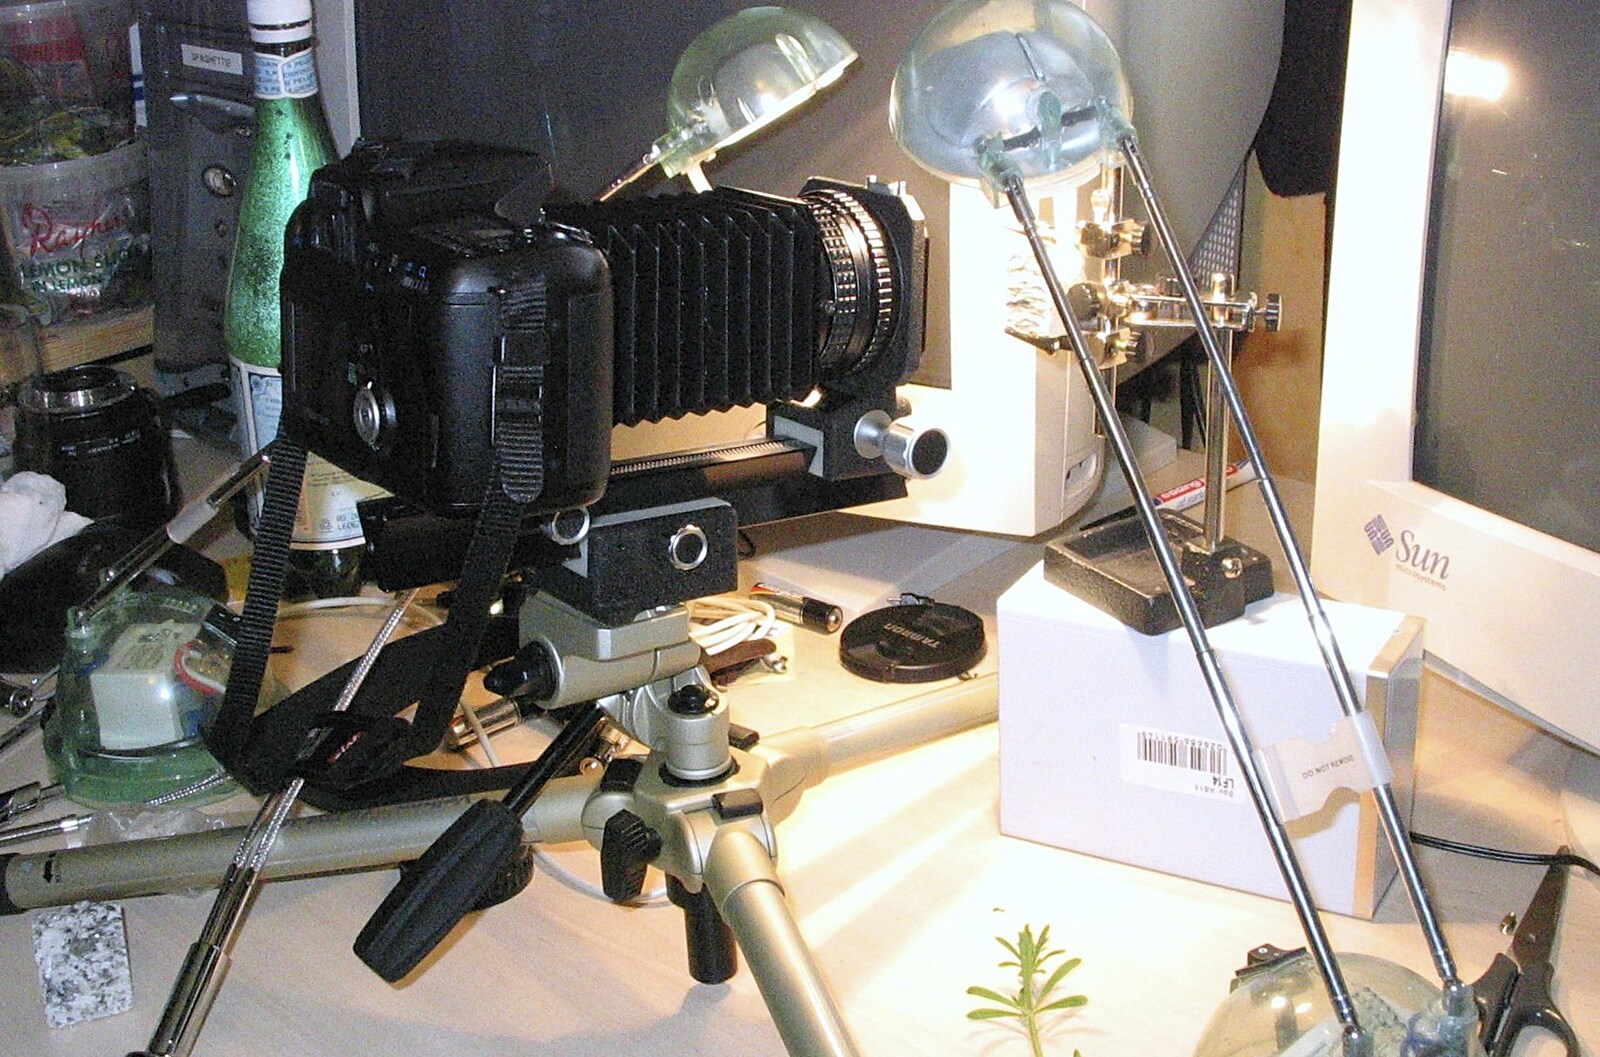 The set-up: the camera on ultra-low tripod from Fun With Bellows: Macro Photography, Brome, Suffolk - 13th May 2006